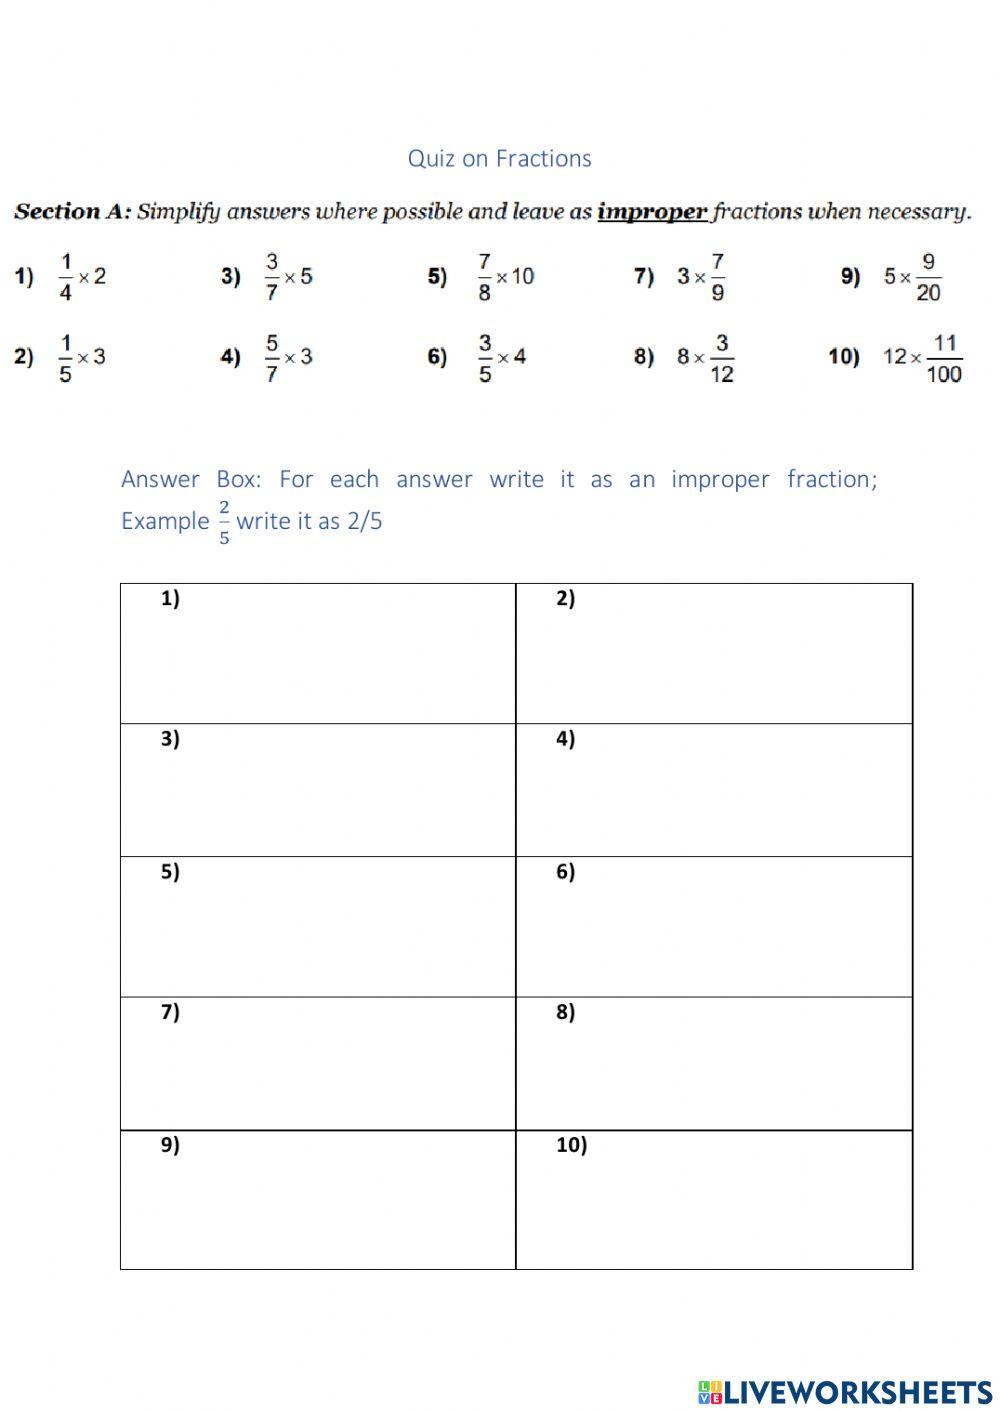 Quiz of Fractions Section A